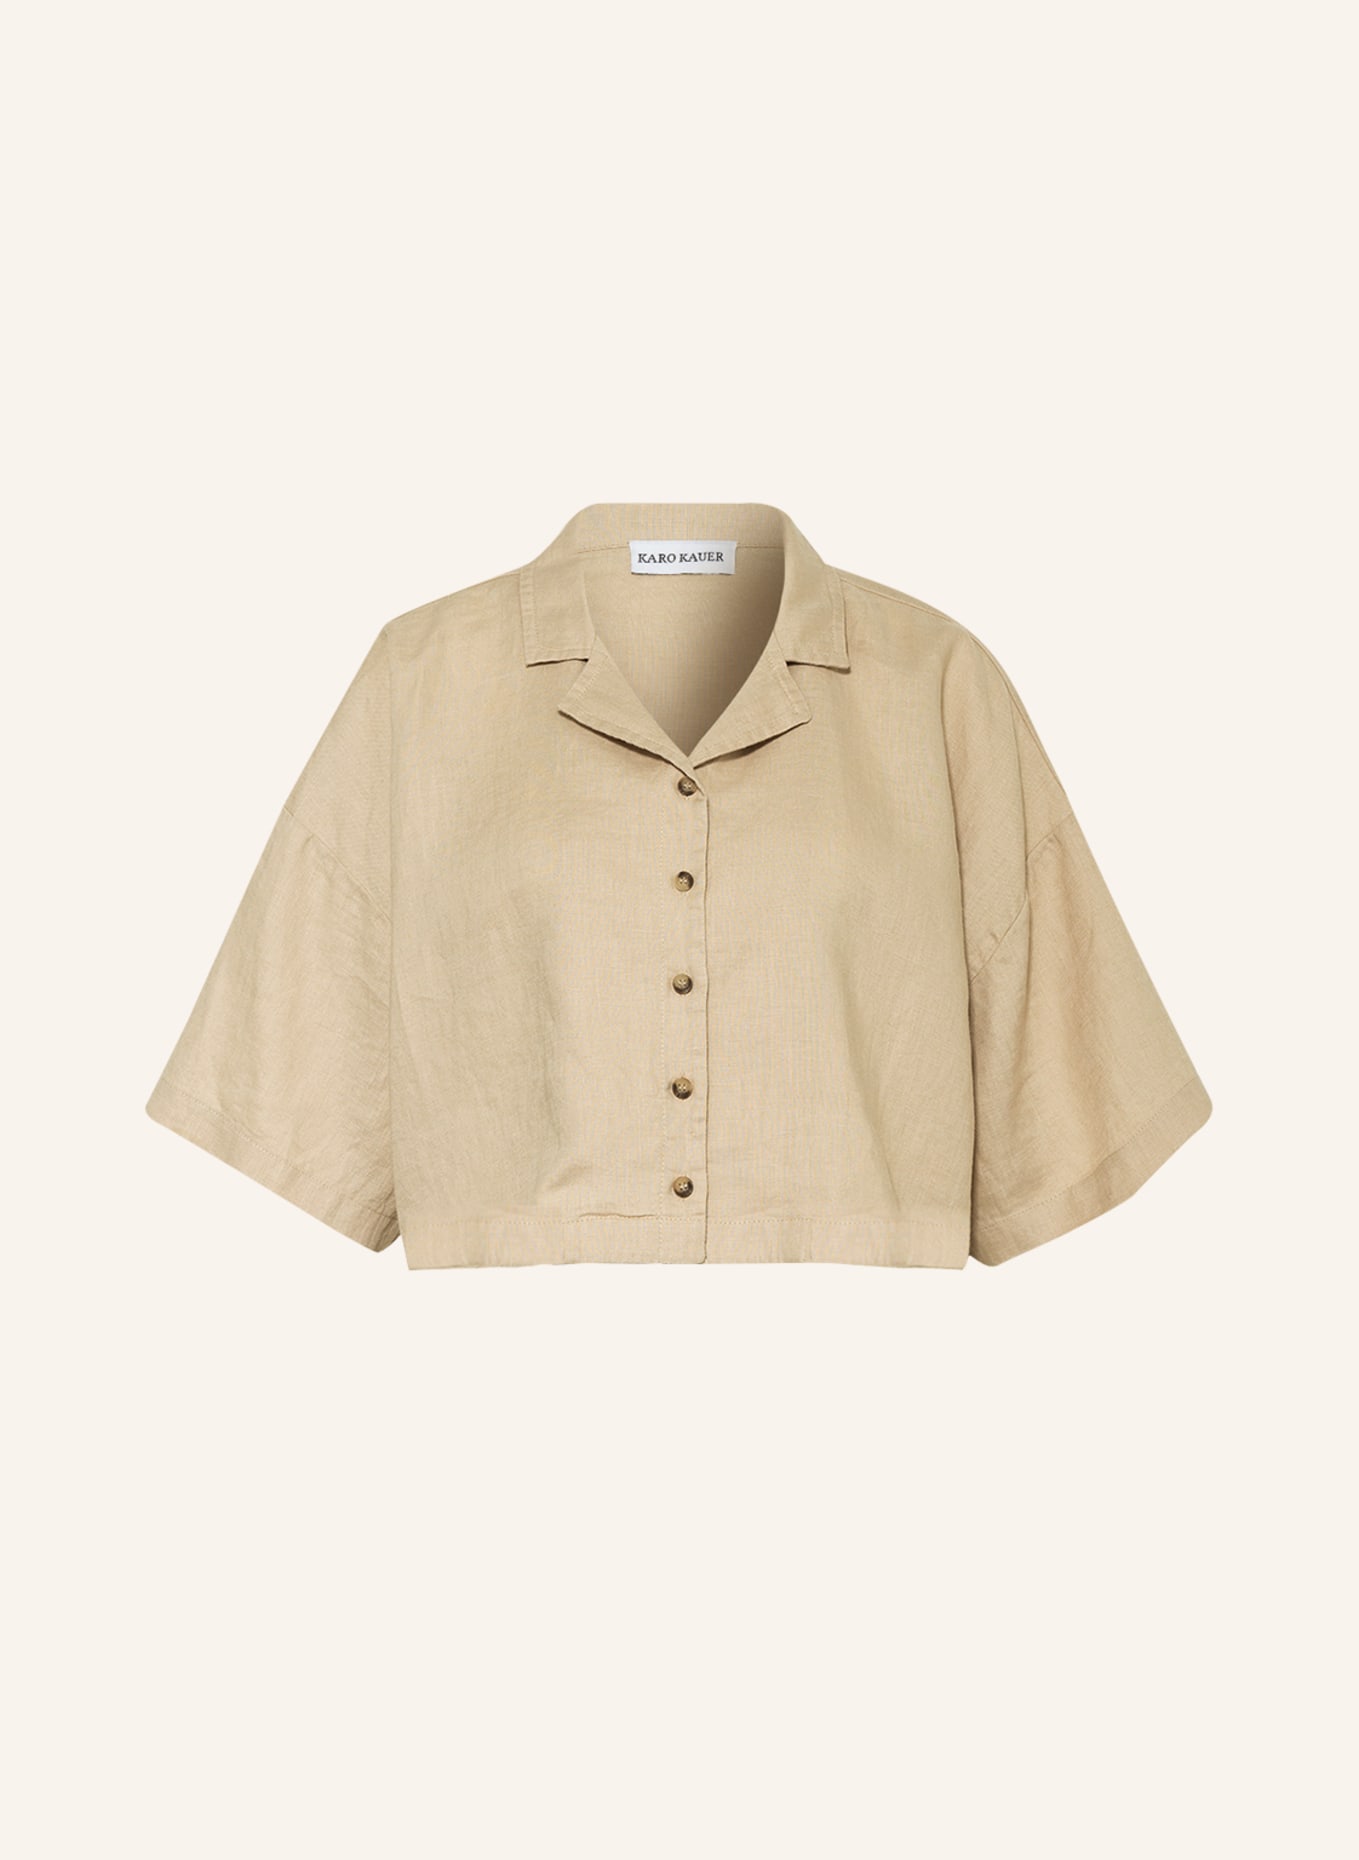 KARO KAUER Cropped blouse made of linen, Color: BEIGE (Image 1)